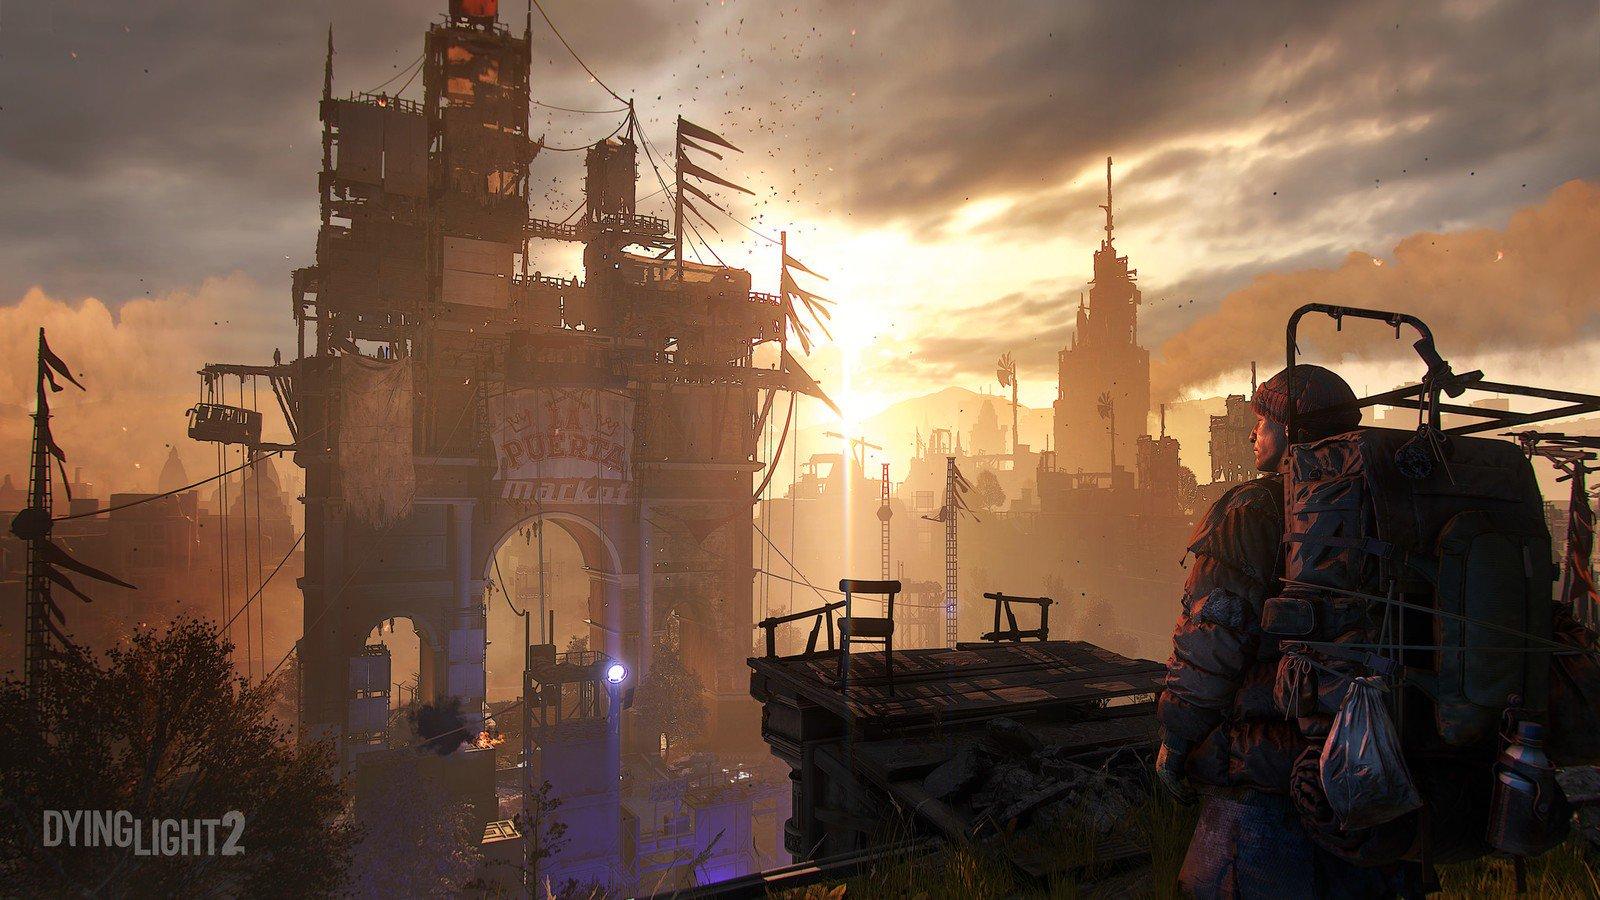 Dying Light 2 Xbox Preview: A Dark Post Apocalyptic Parkour